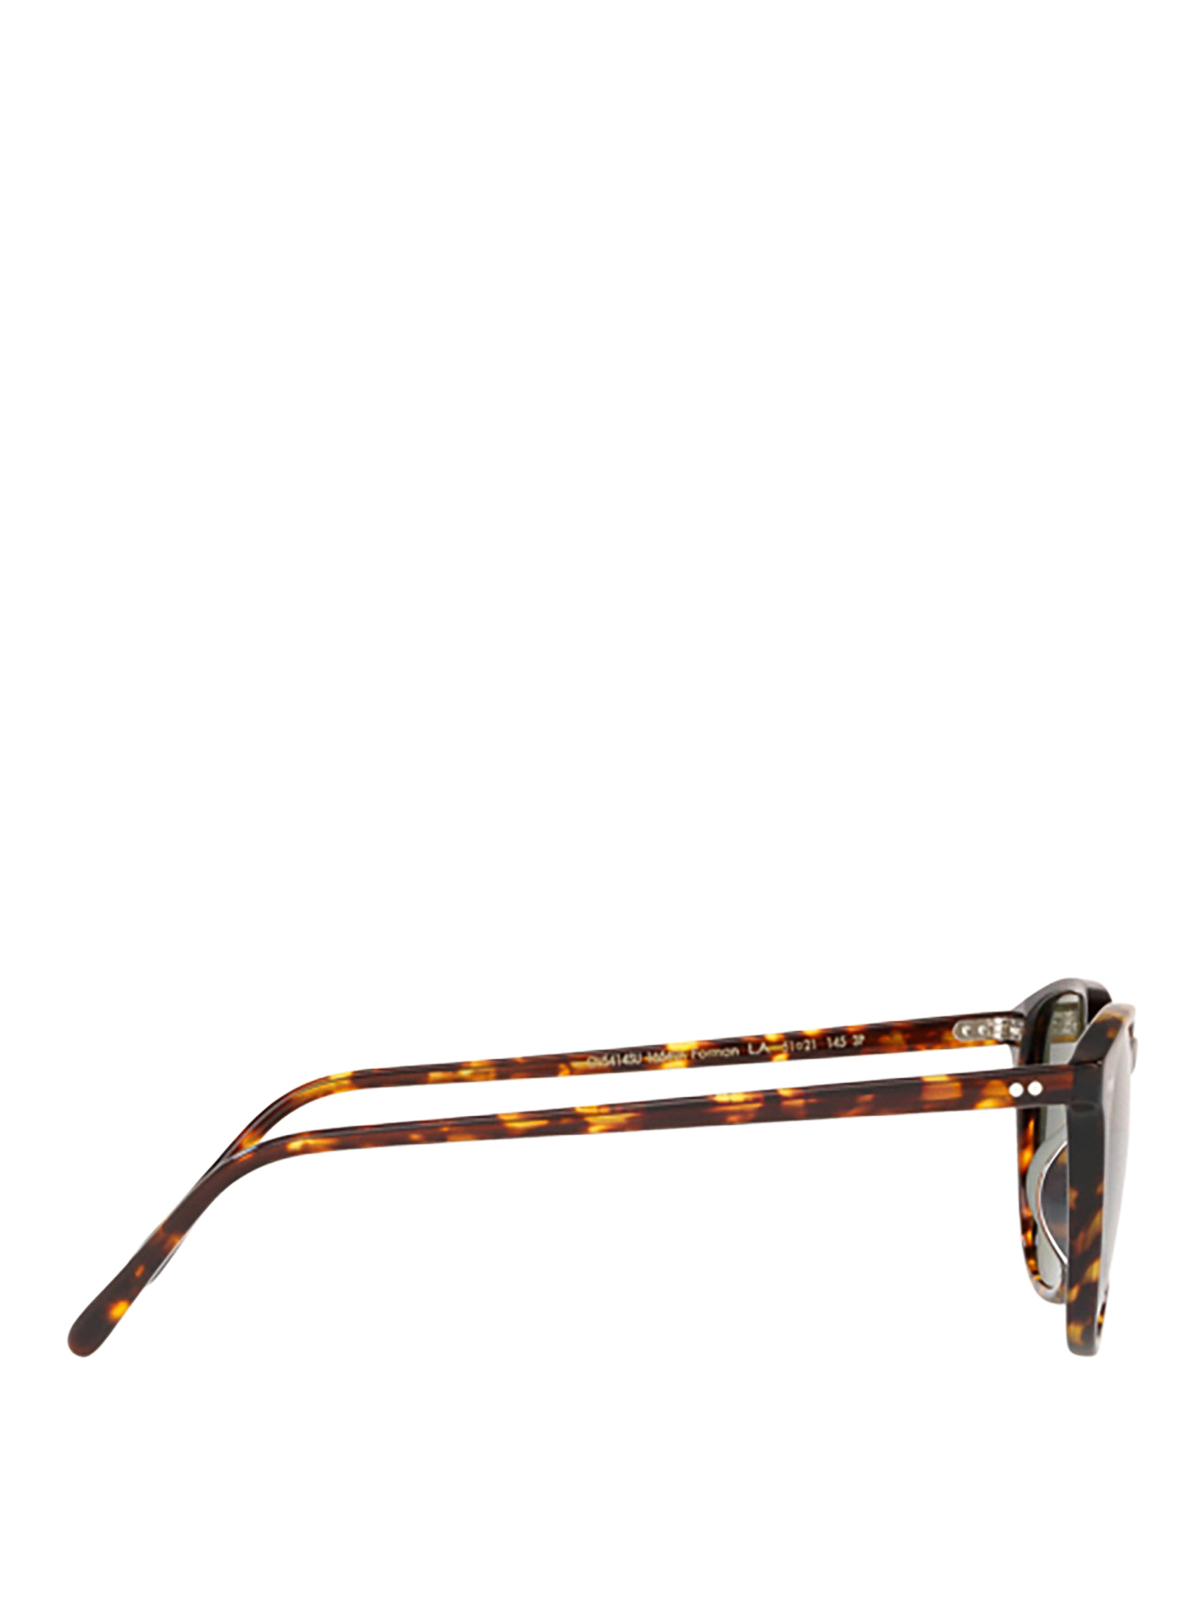 Shop Oliver Peoples Forman L.a Tortoiseshell Sunglasses In Marrón